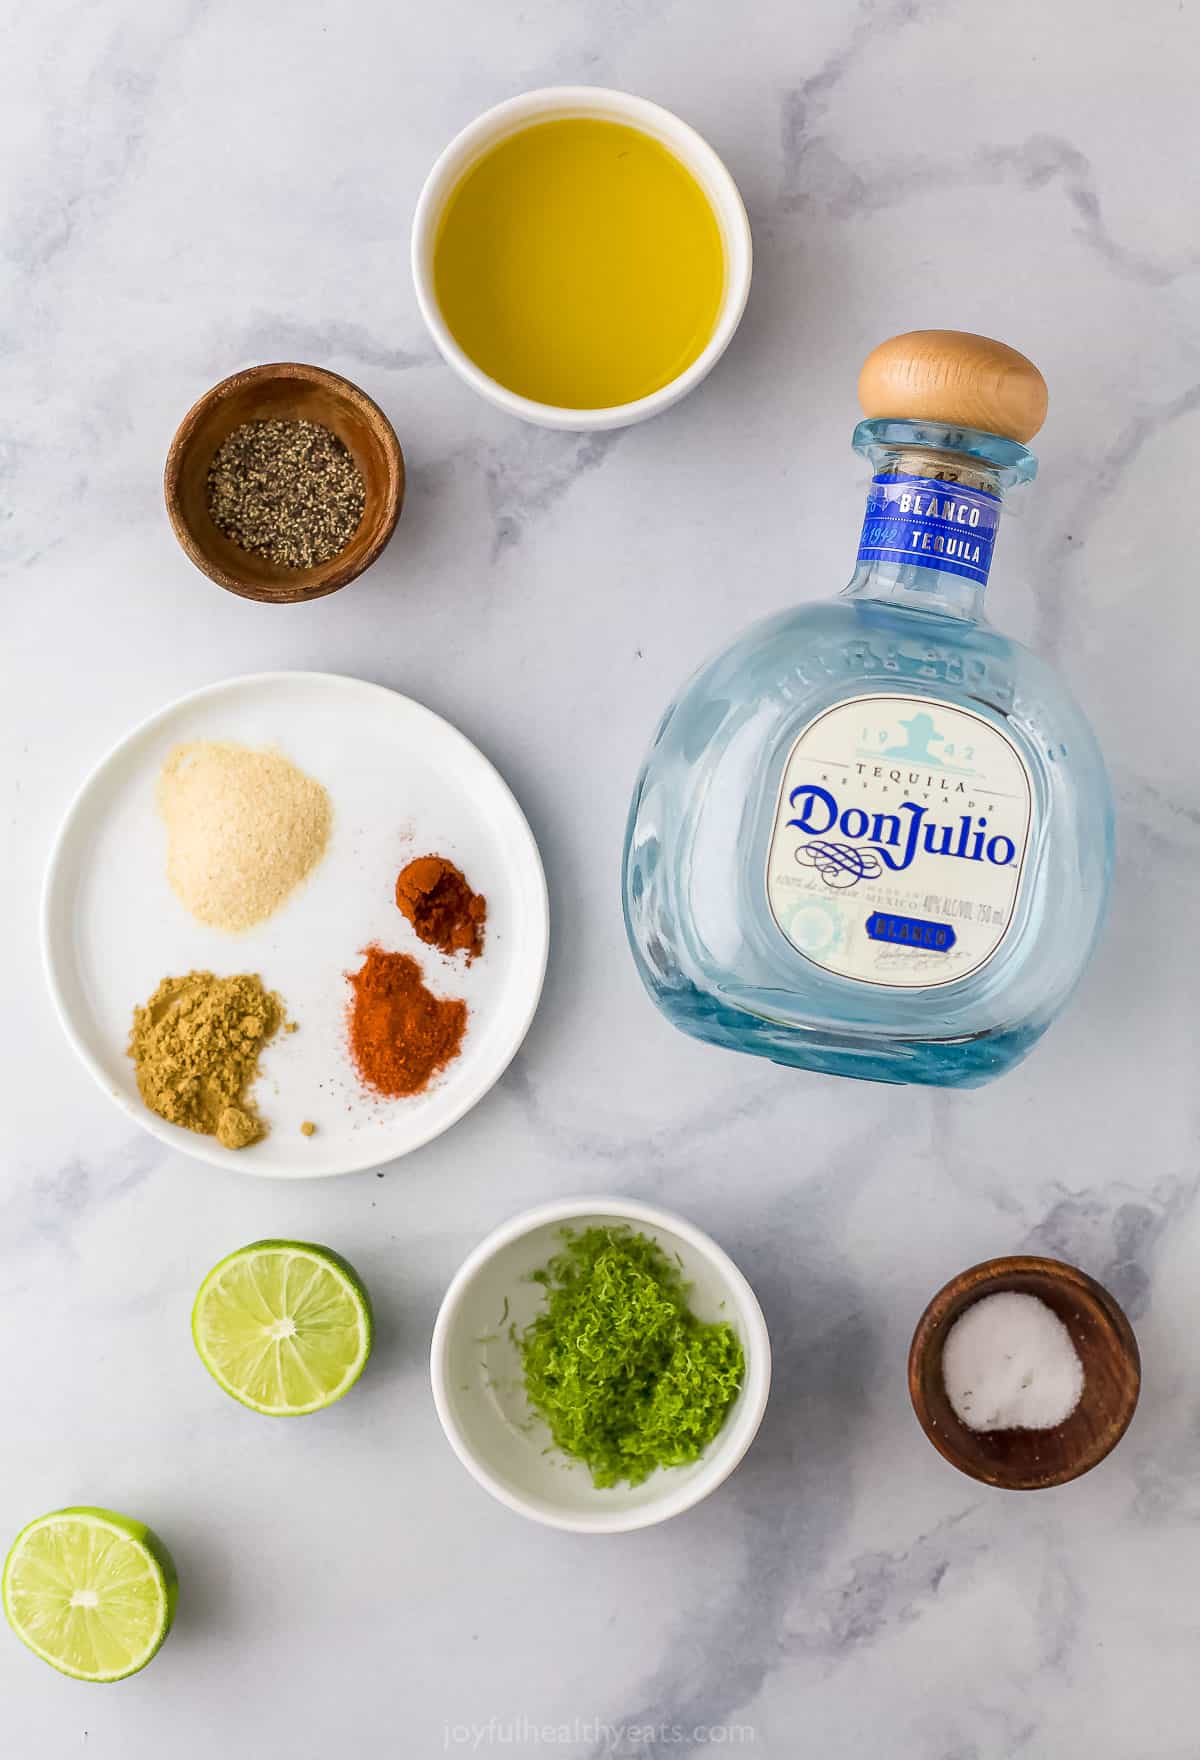 A bottle of tequila, a halved lime, garlic powder and the rest of the grilled chicken ingredients on a kitchen countertop